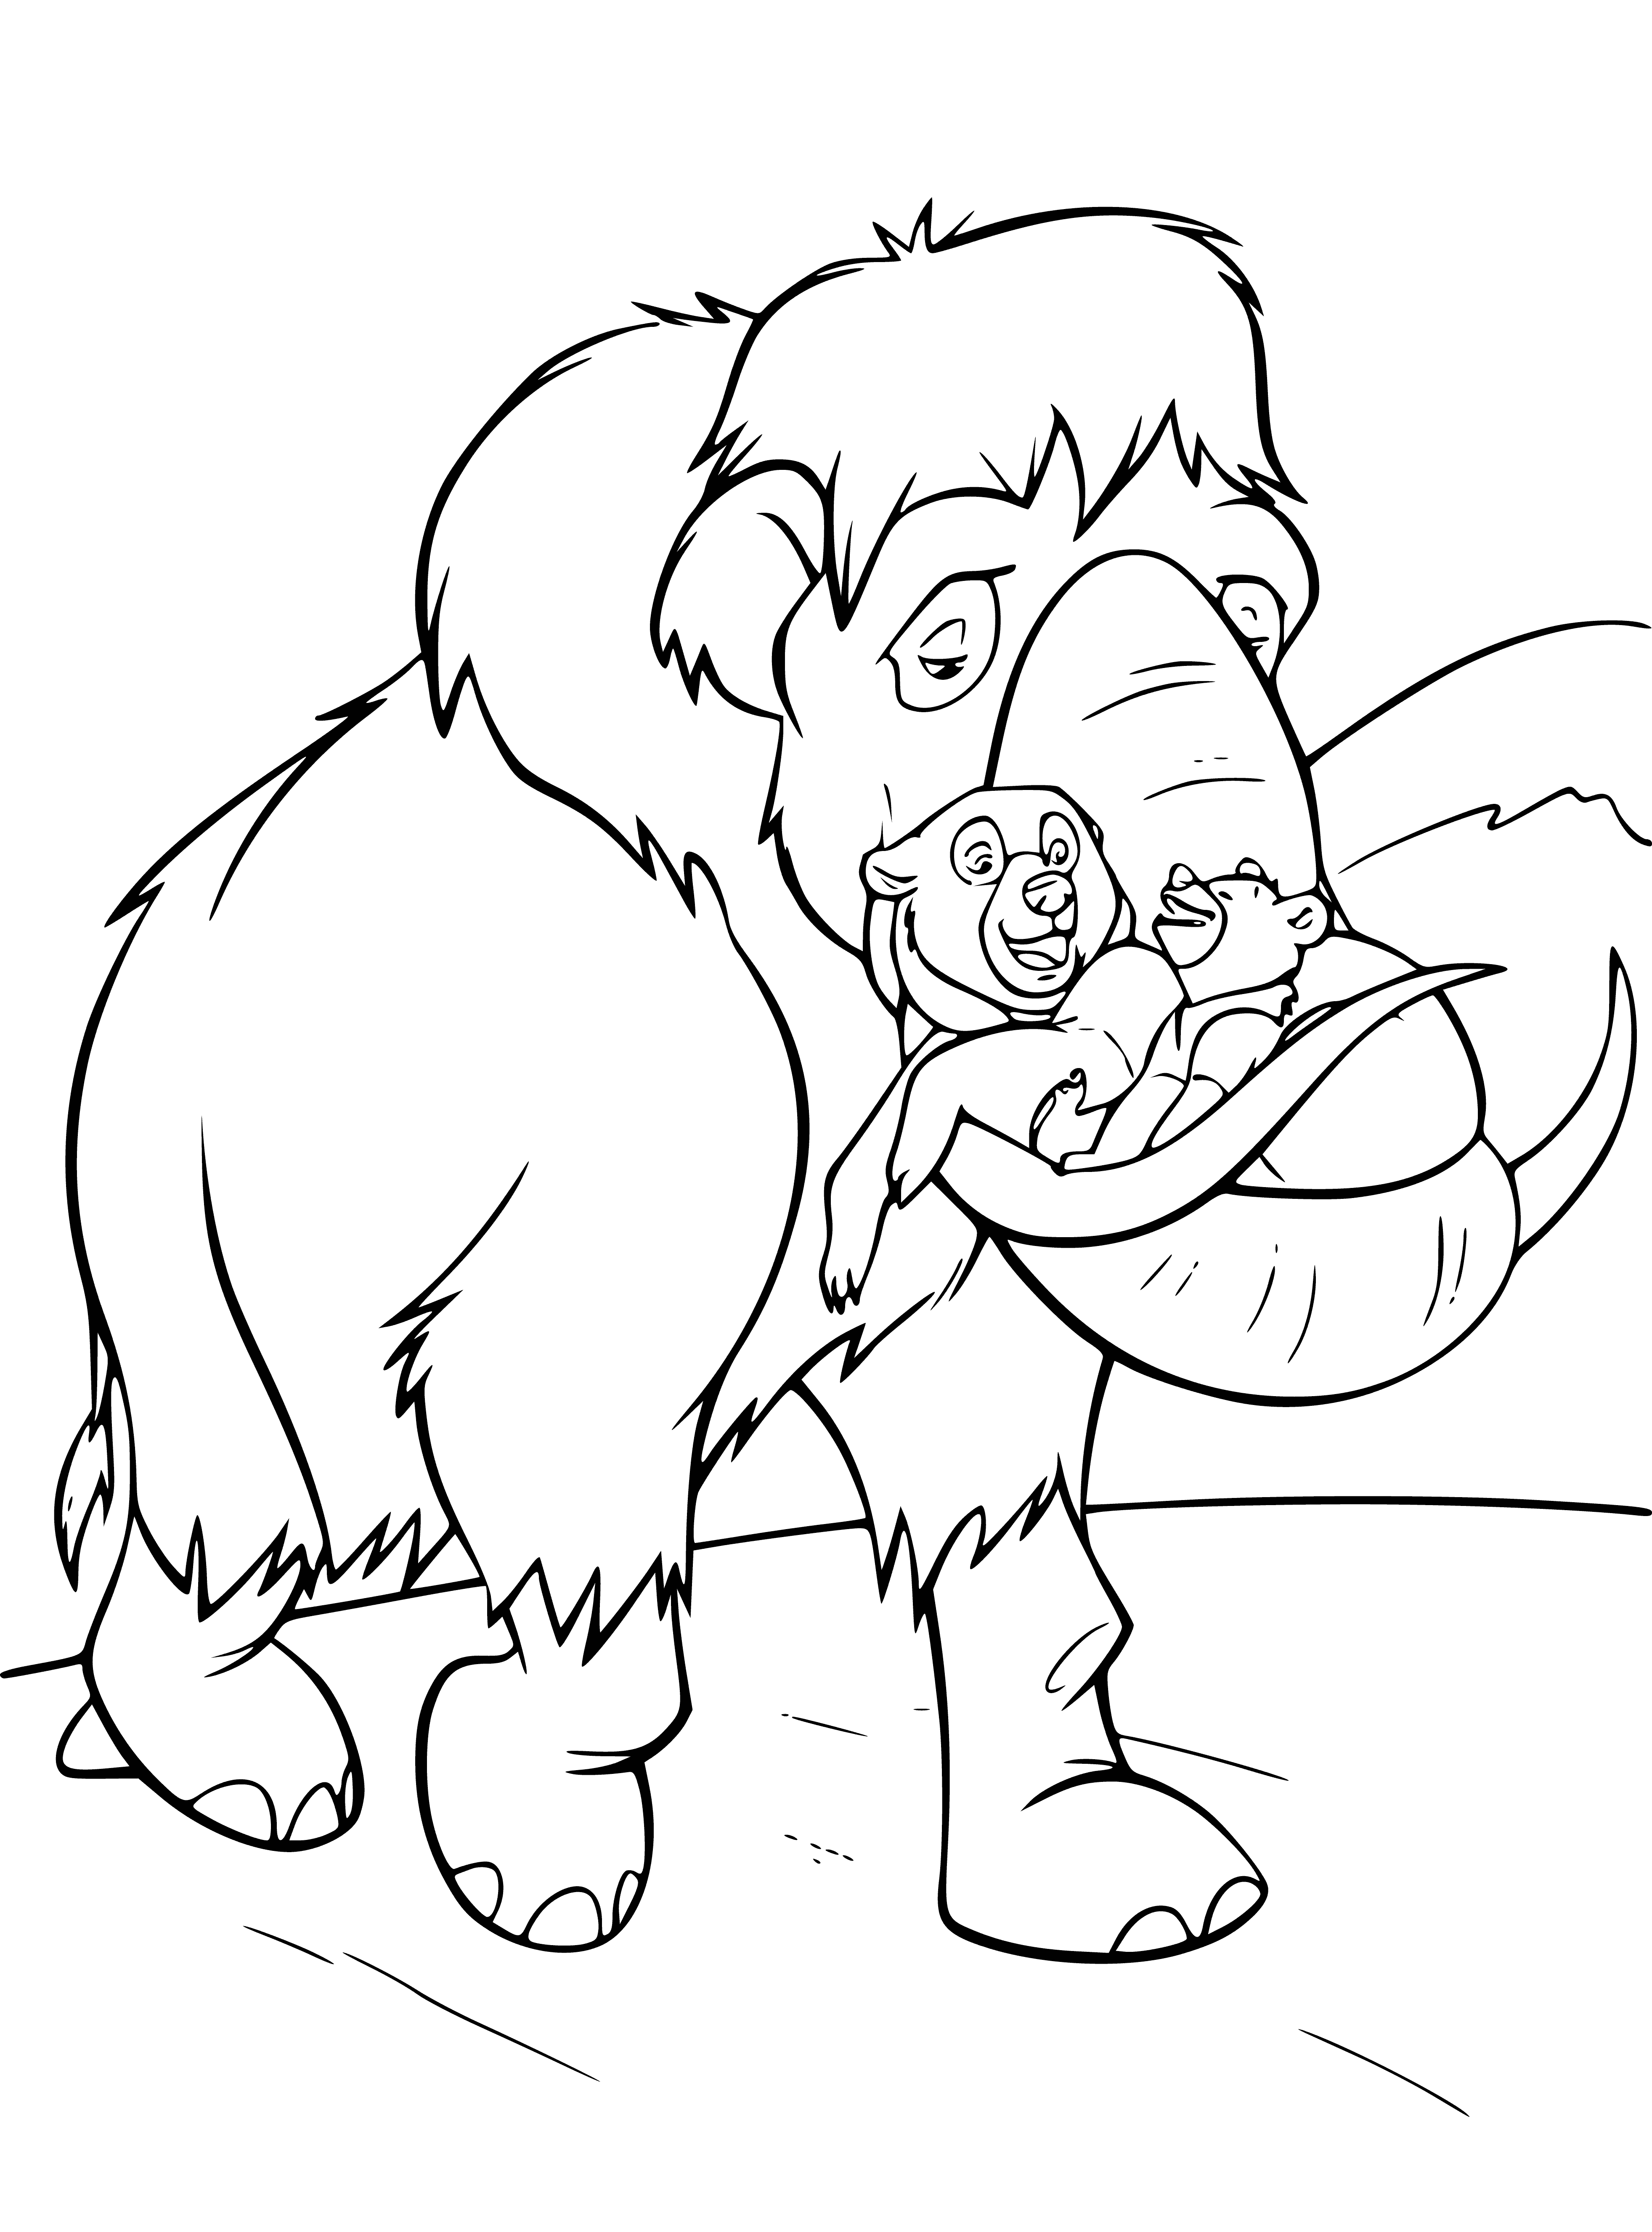 Mammoth carries bears coloring page